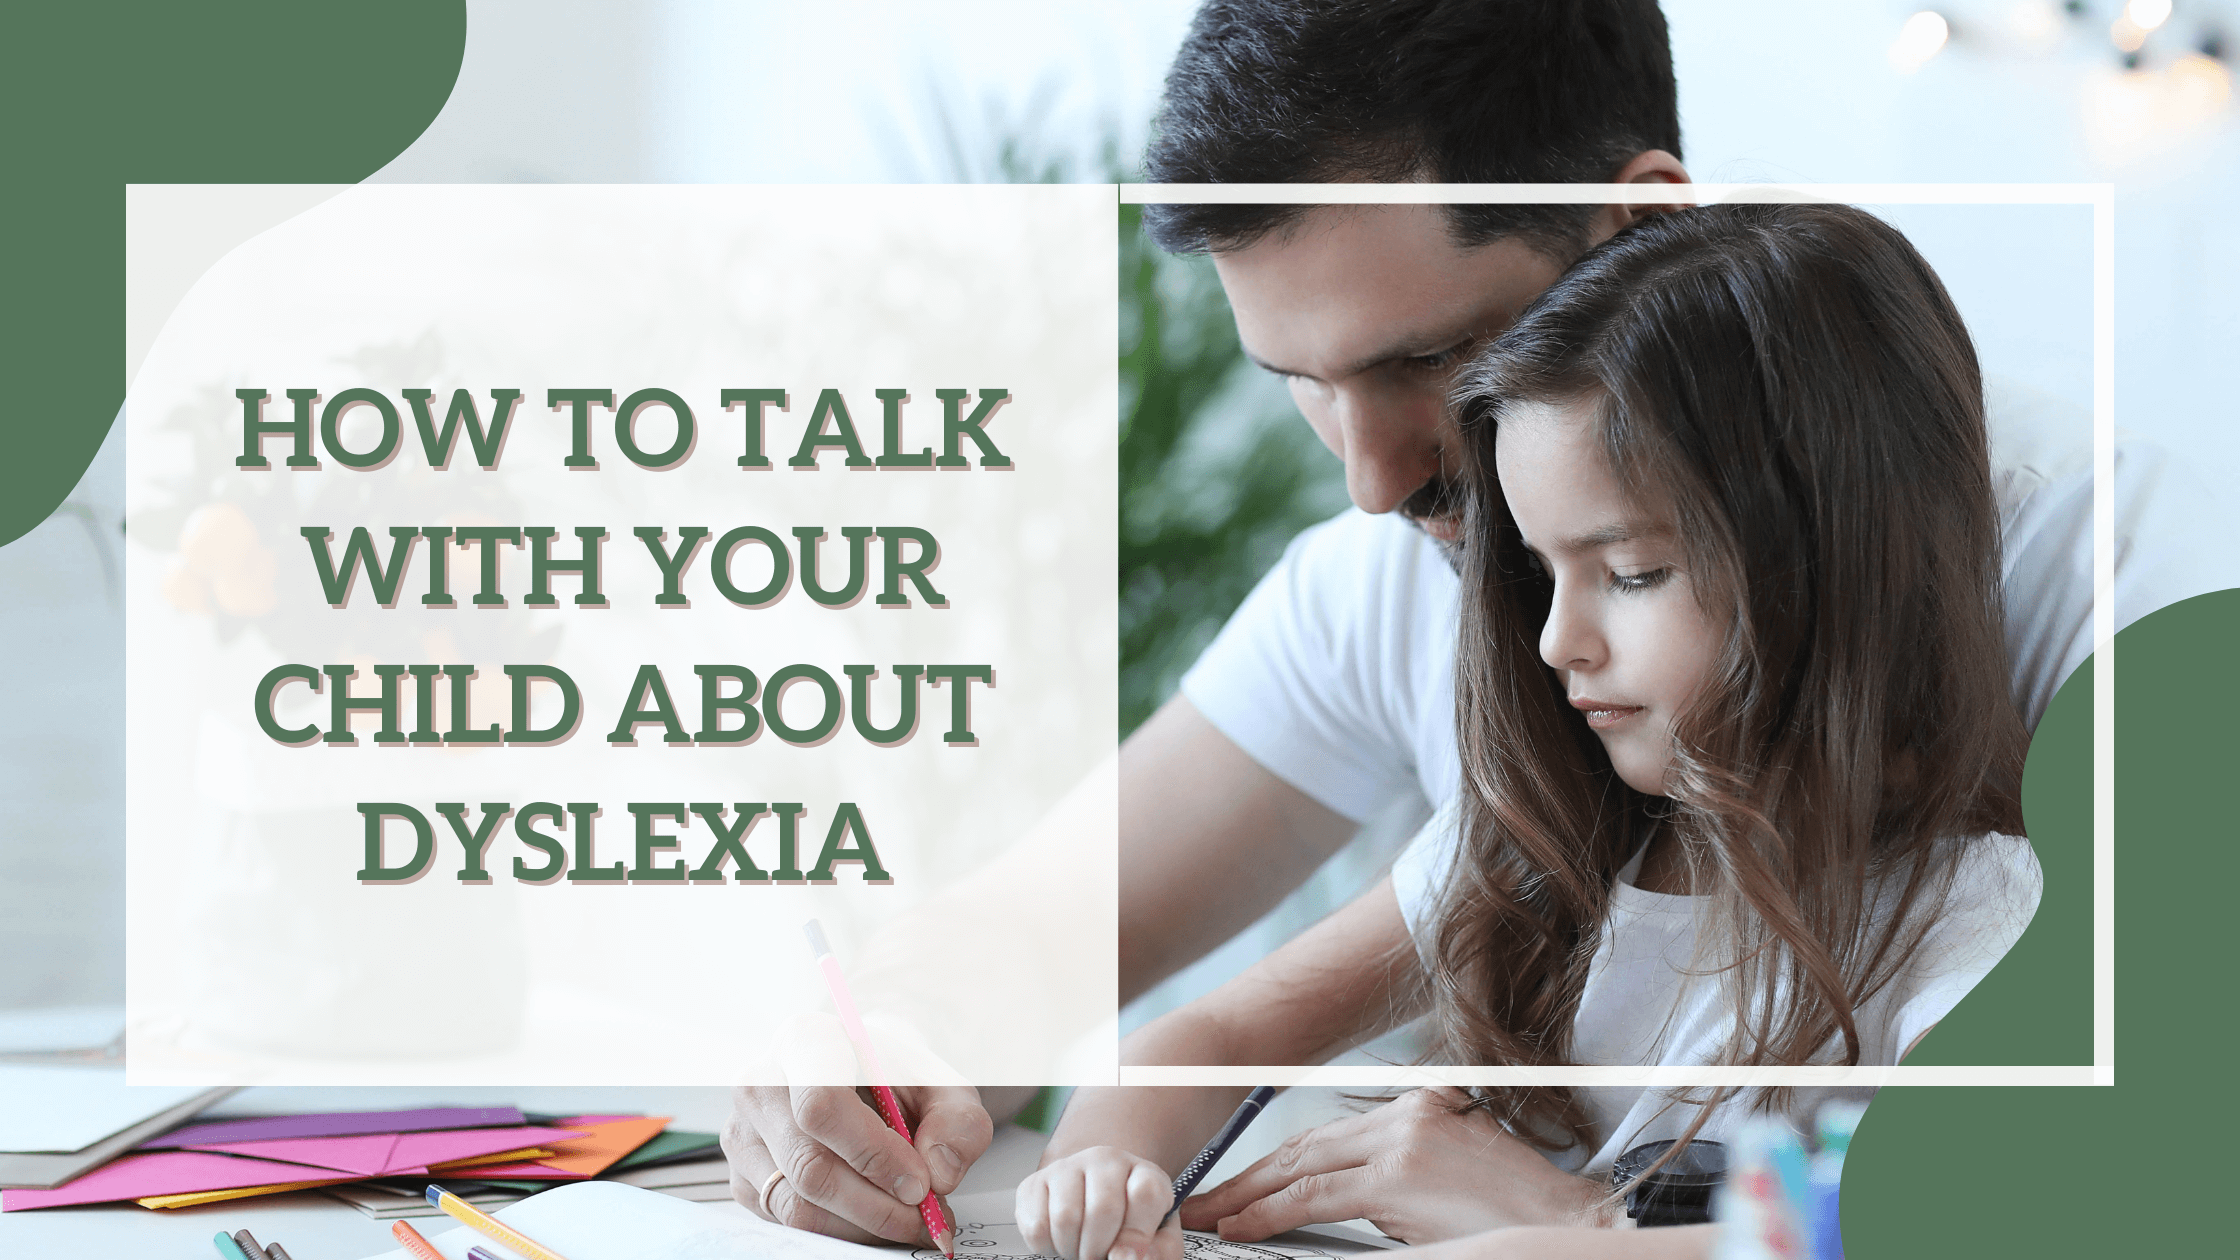 How to talk with your child about dyslexia